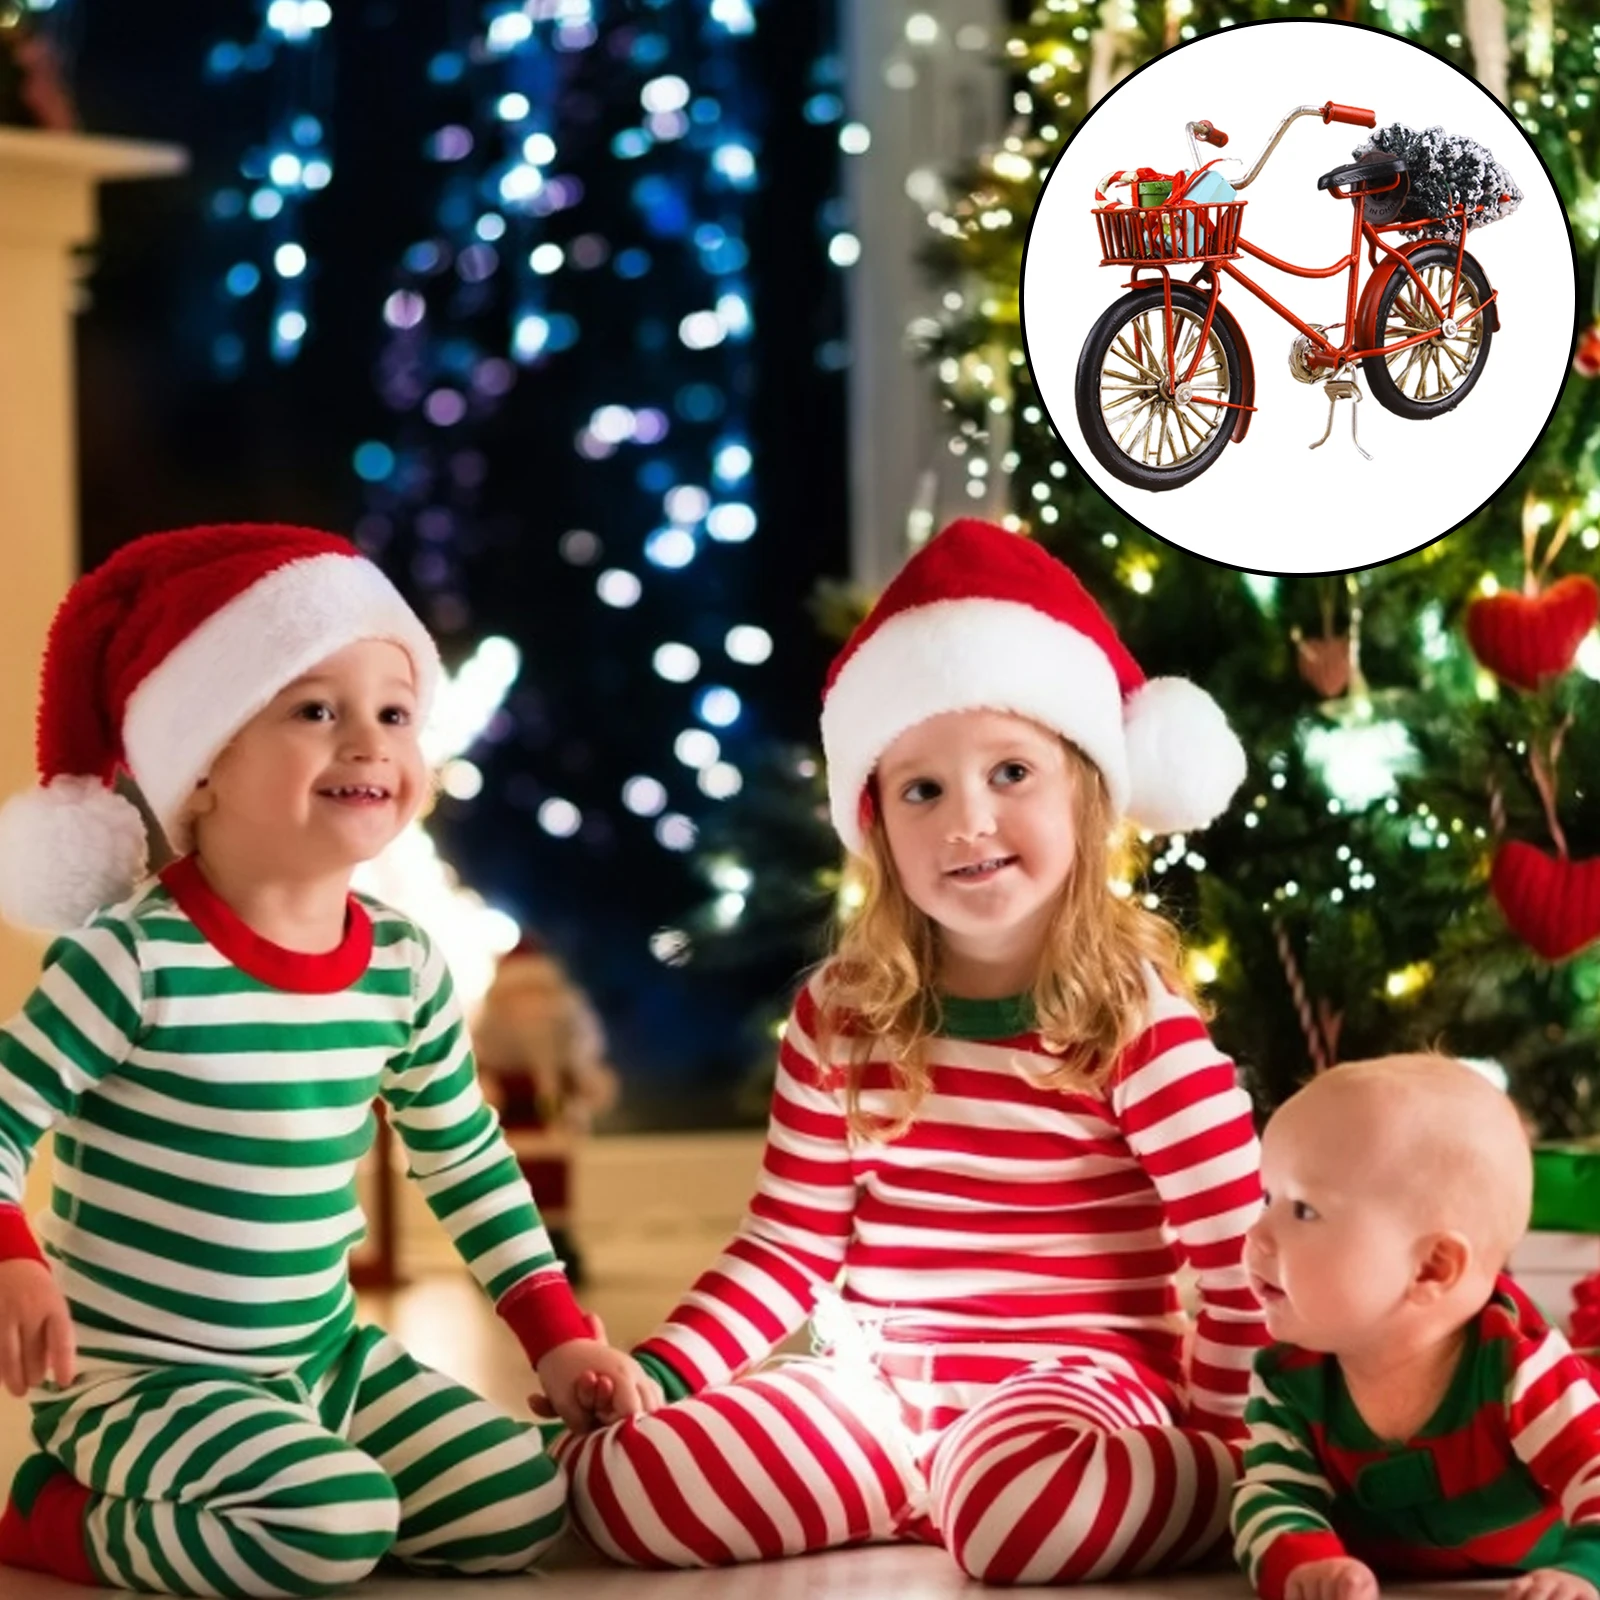 1/10 Scale Miniature Finger Mountain Bike Toy Finger Bicycle Miniature Mountain Bike Toys Vehicles Diecast Collection Gifts